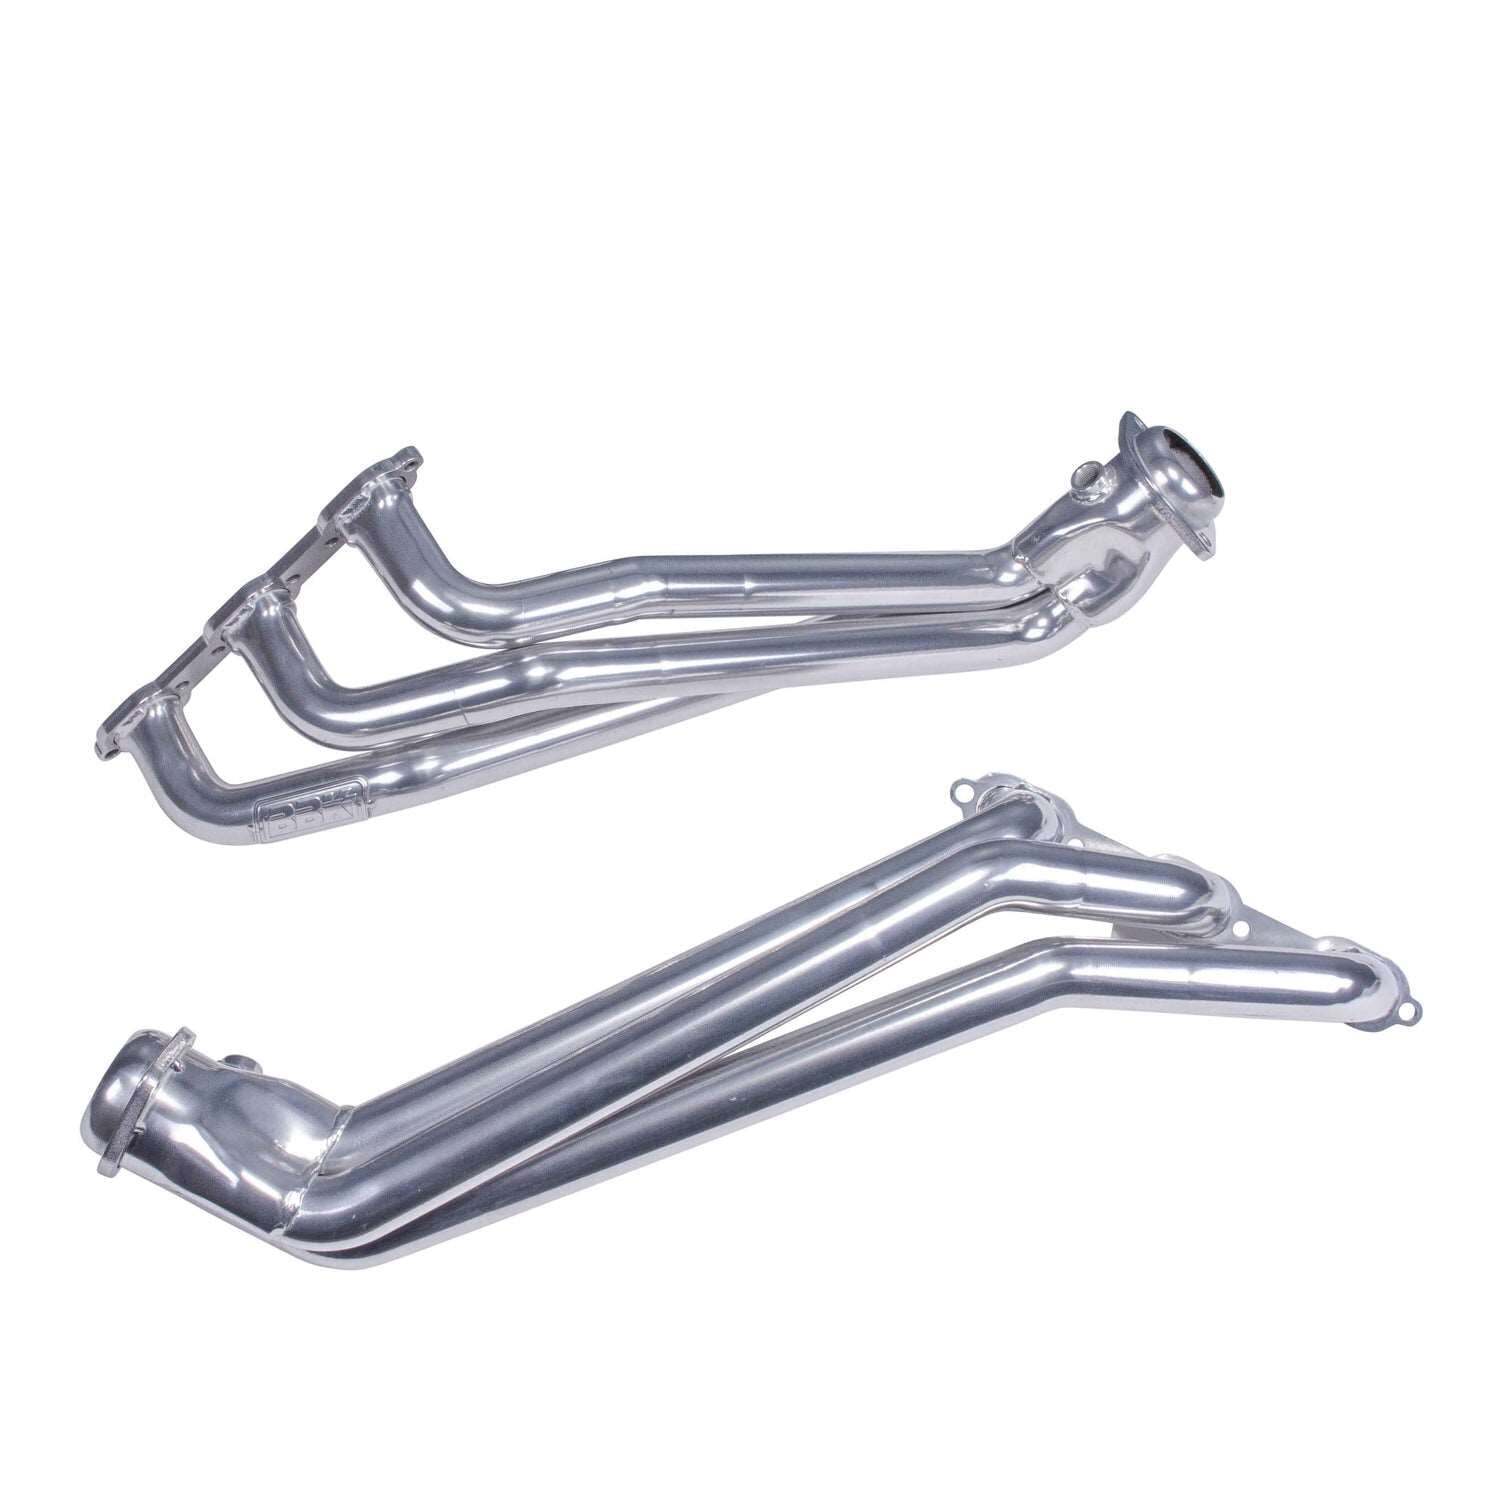 Dodge Challenger Charger 300 V6 3.5 1-5/8 Long Tube Exhaust Headers Polished Sil